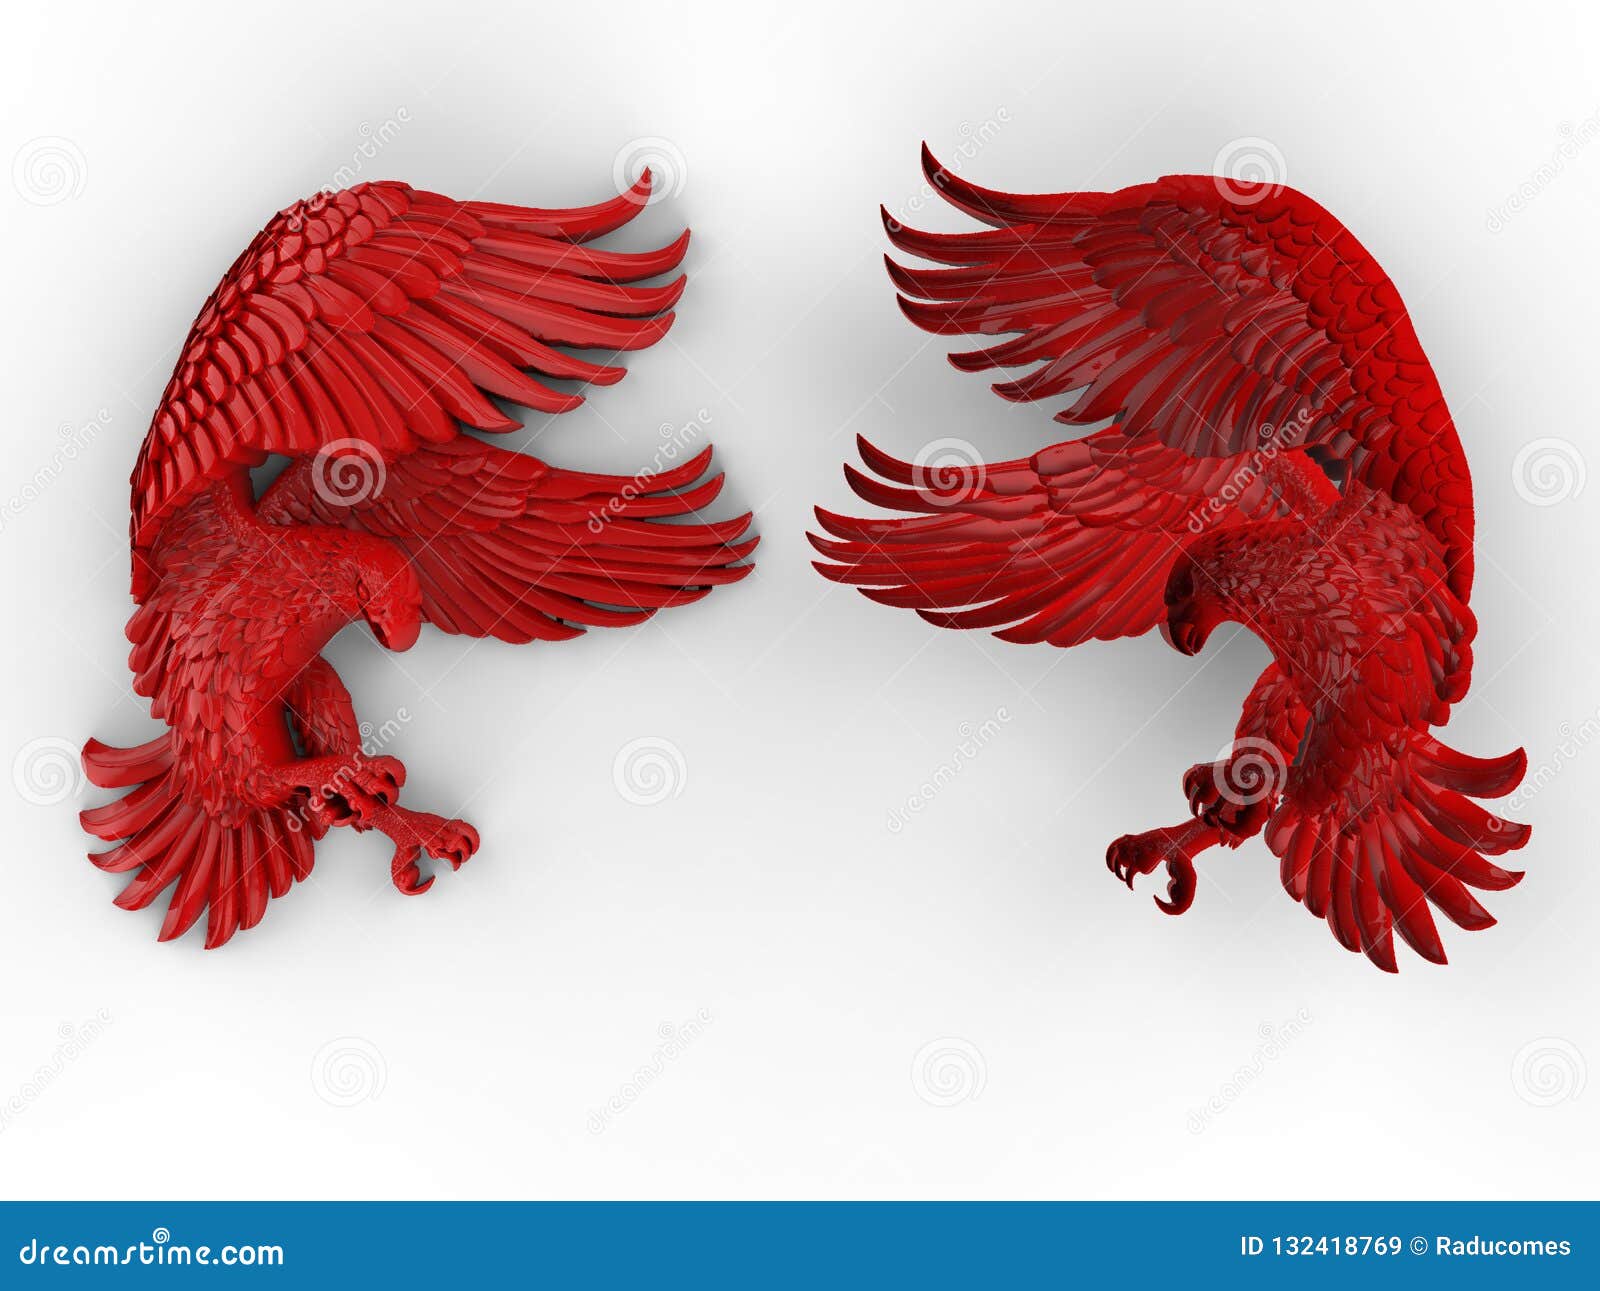 Two Mirrored Red Eagle Ornaments Stock Illustration - Illustration of claw,  attack: 132418769